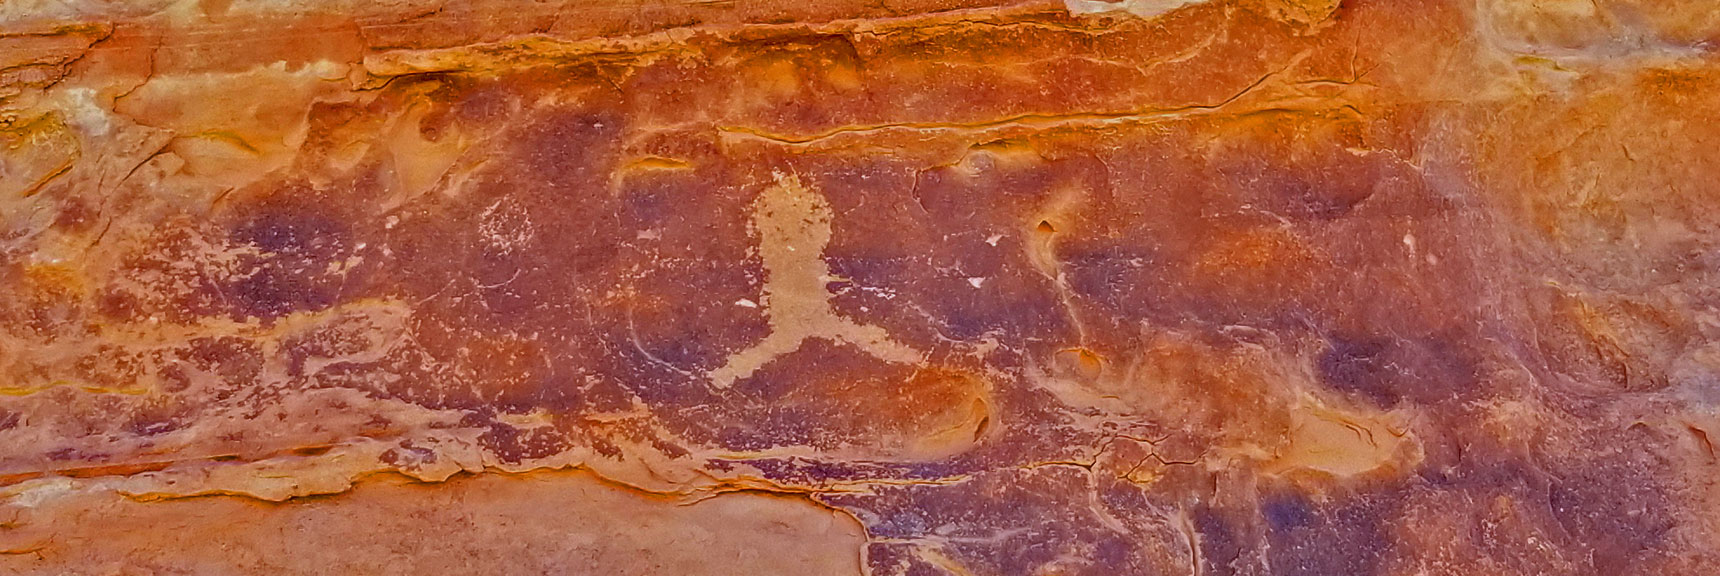 Petroglyphs on Mouse's Tank Trail in Valley of Fire State Park, Nevada, Slide 1